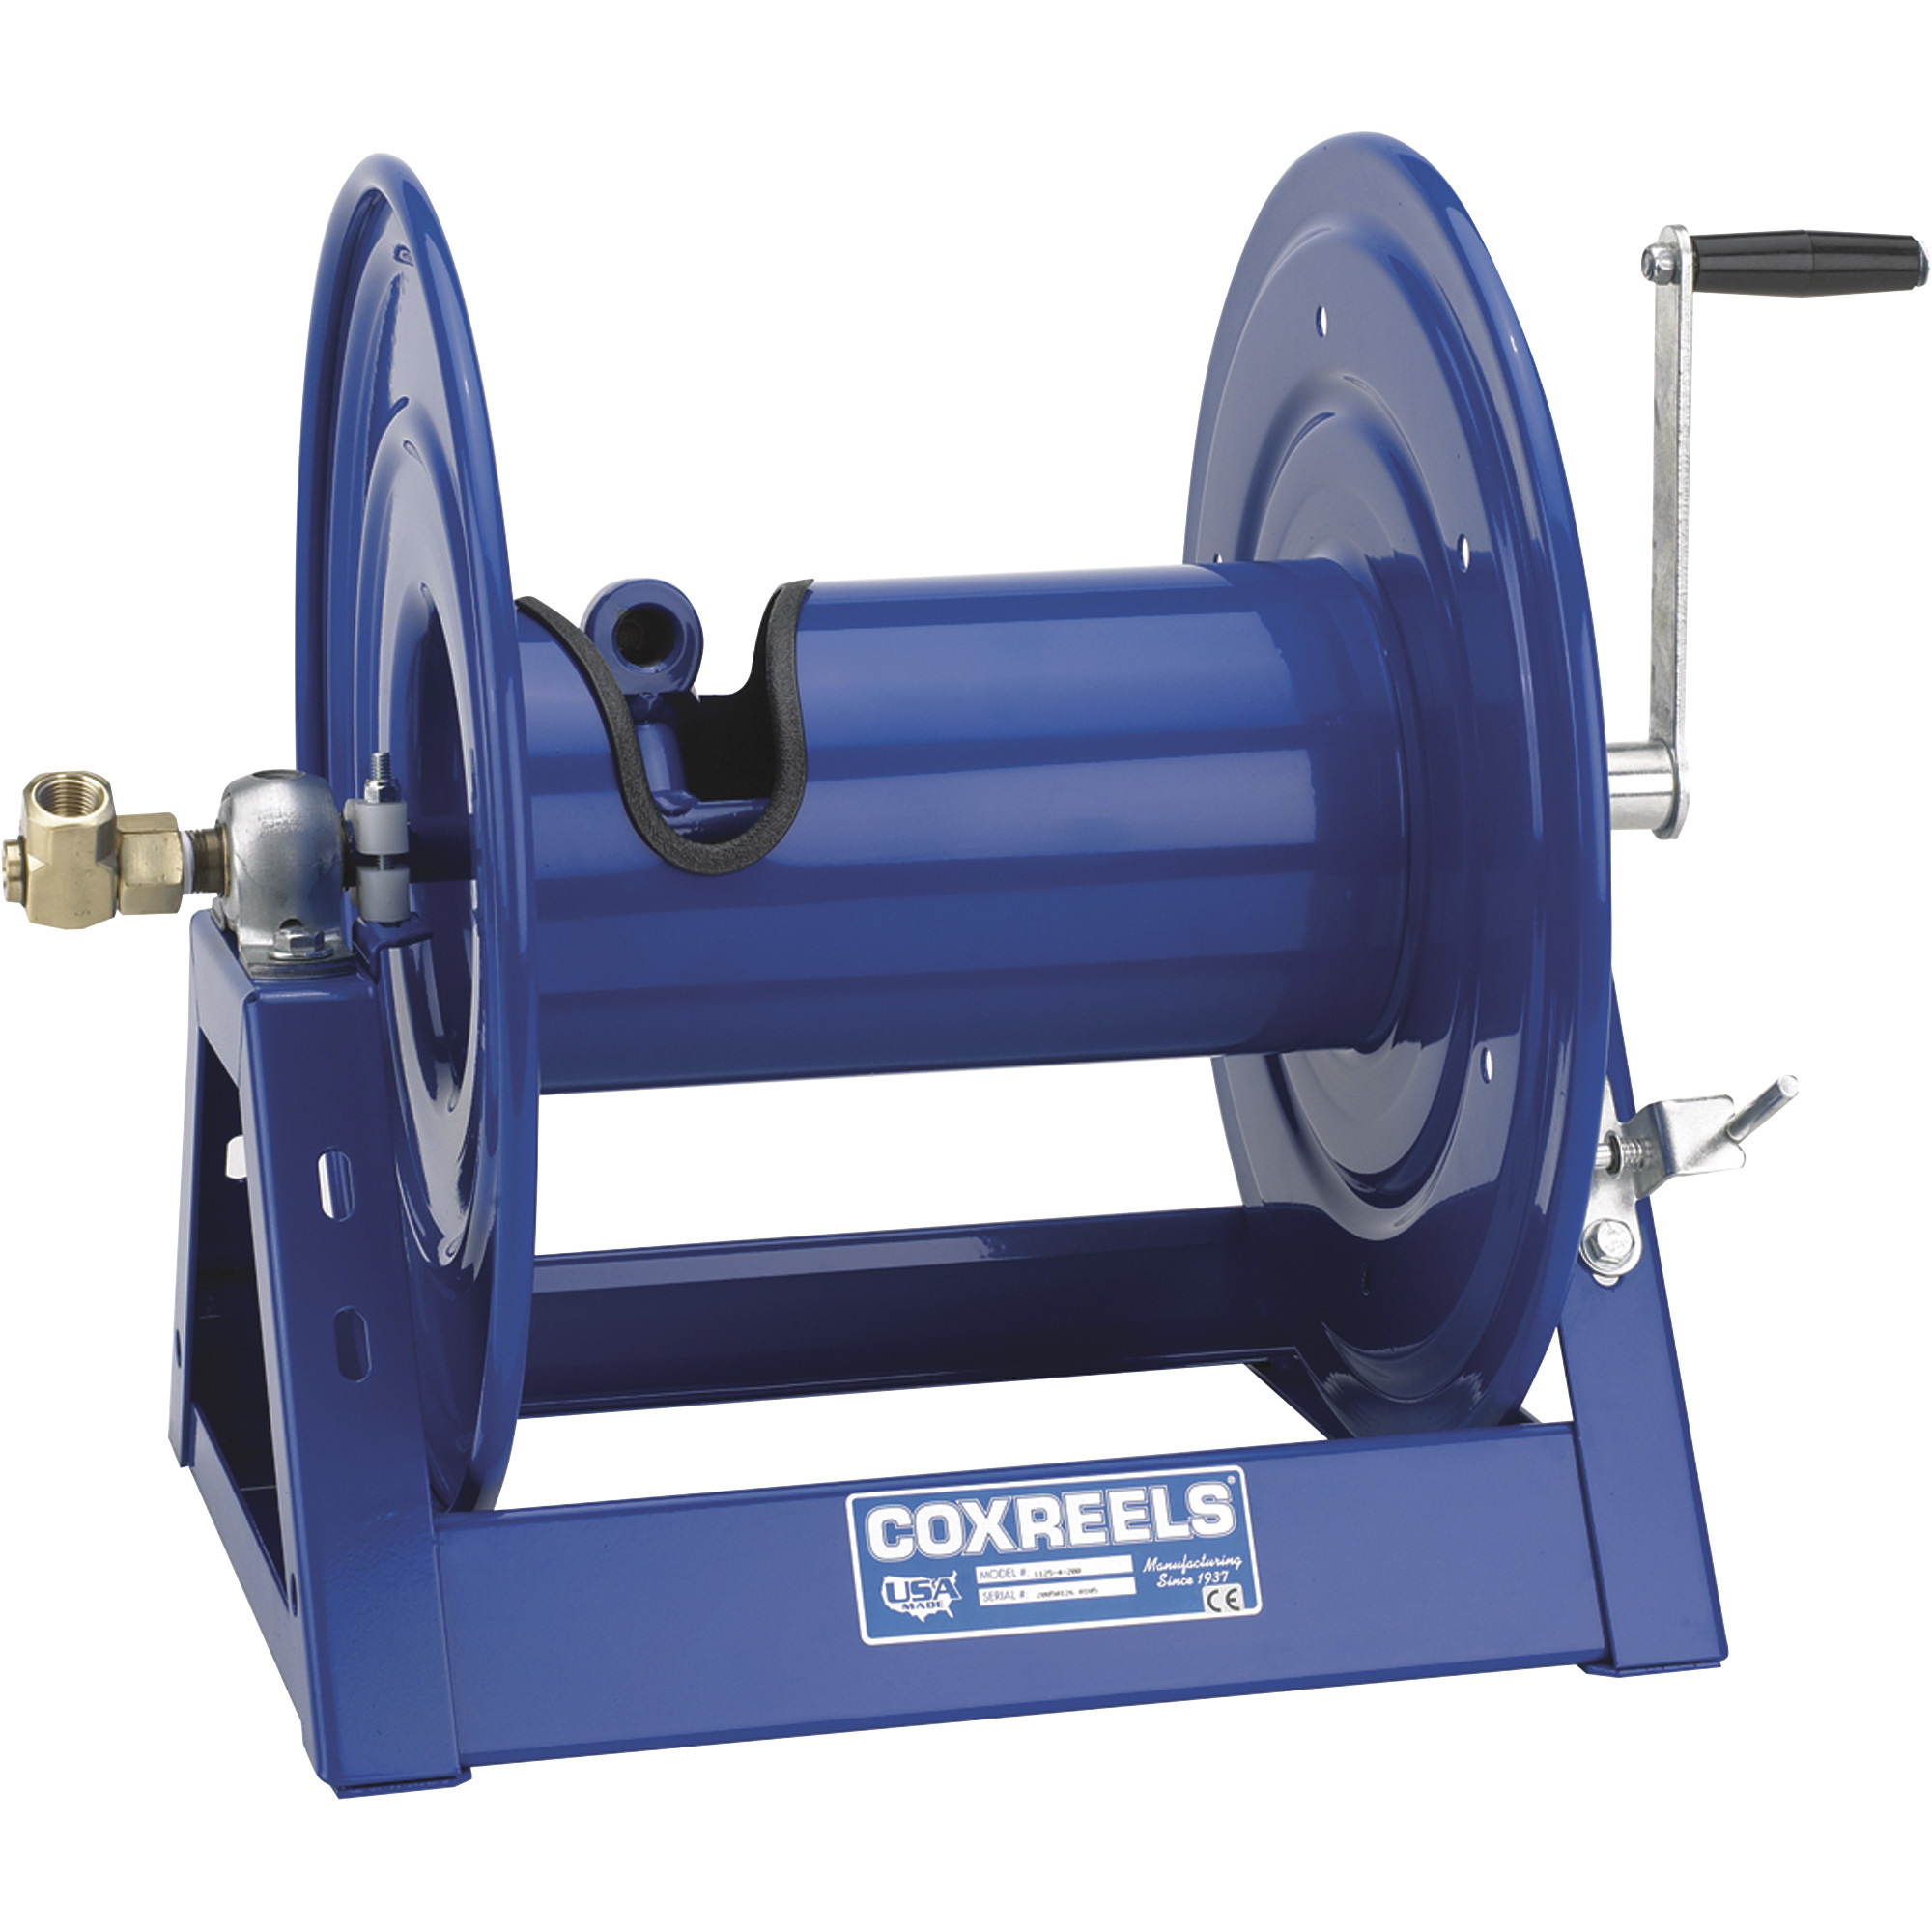 Heavy-Duty 4FT Steel Hose Reel Connector: 4000 PSI, All-Weather Wrap Finish